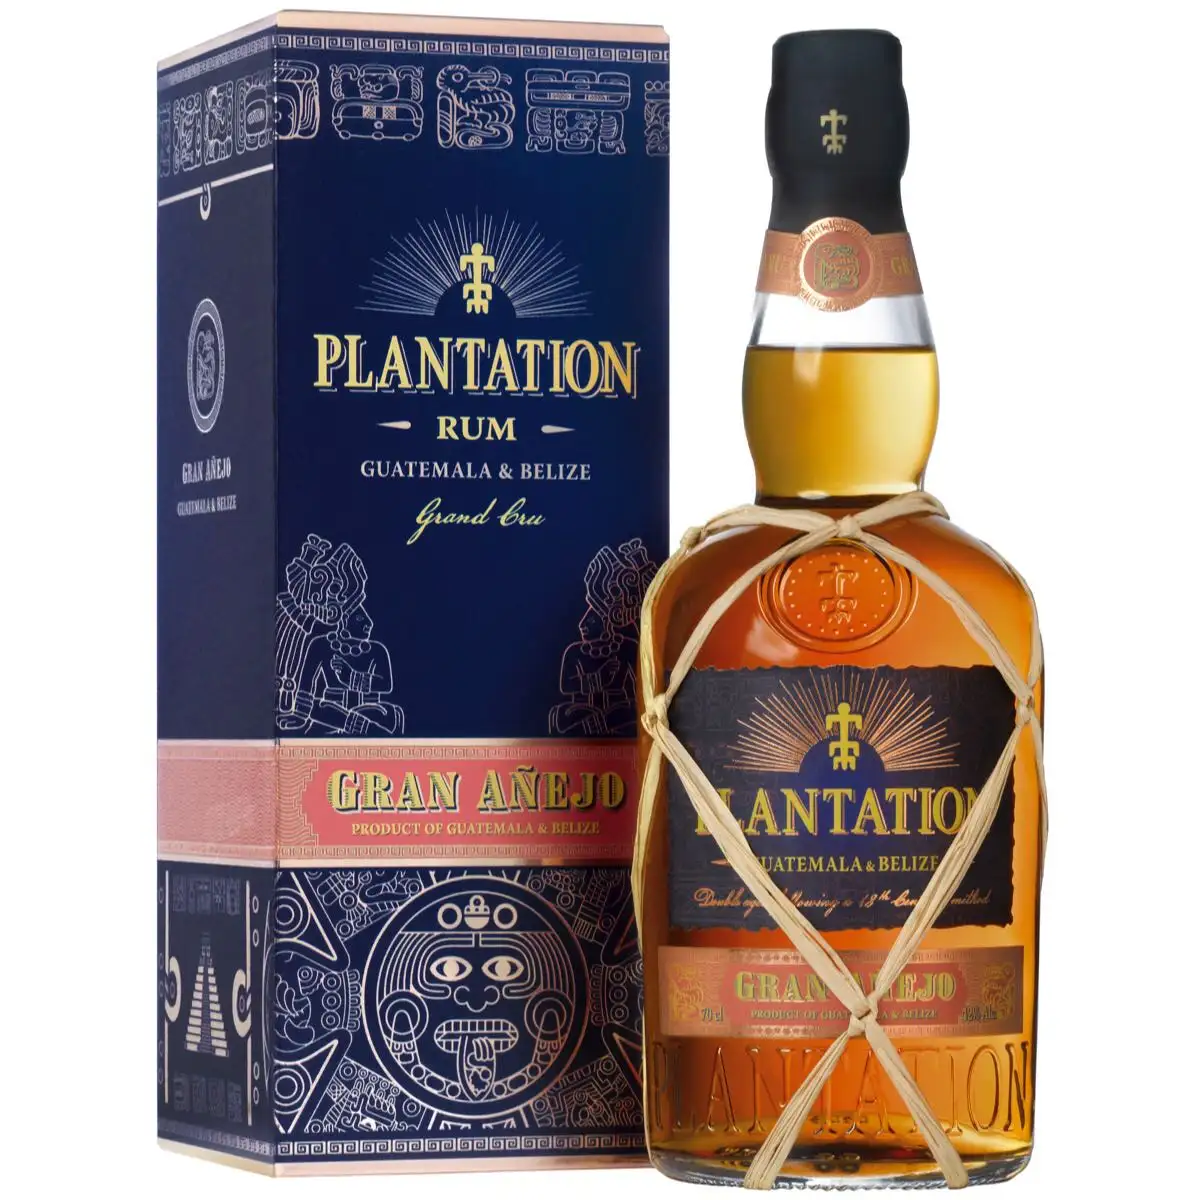 Image of the front of the bottle of the rum Plantation Gran Añejo (Guatemala & Belize)